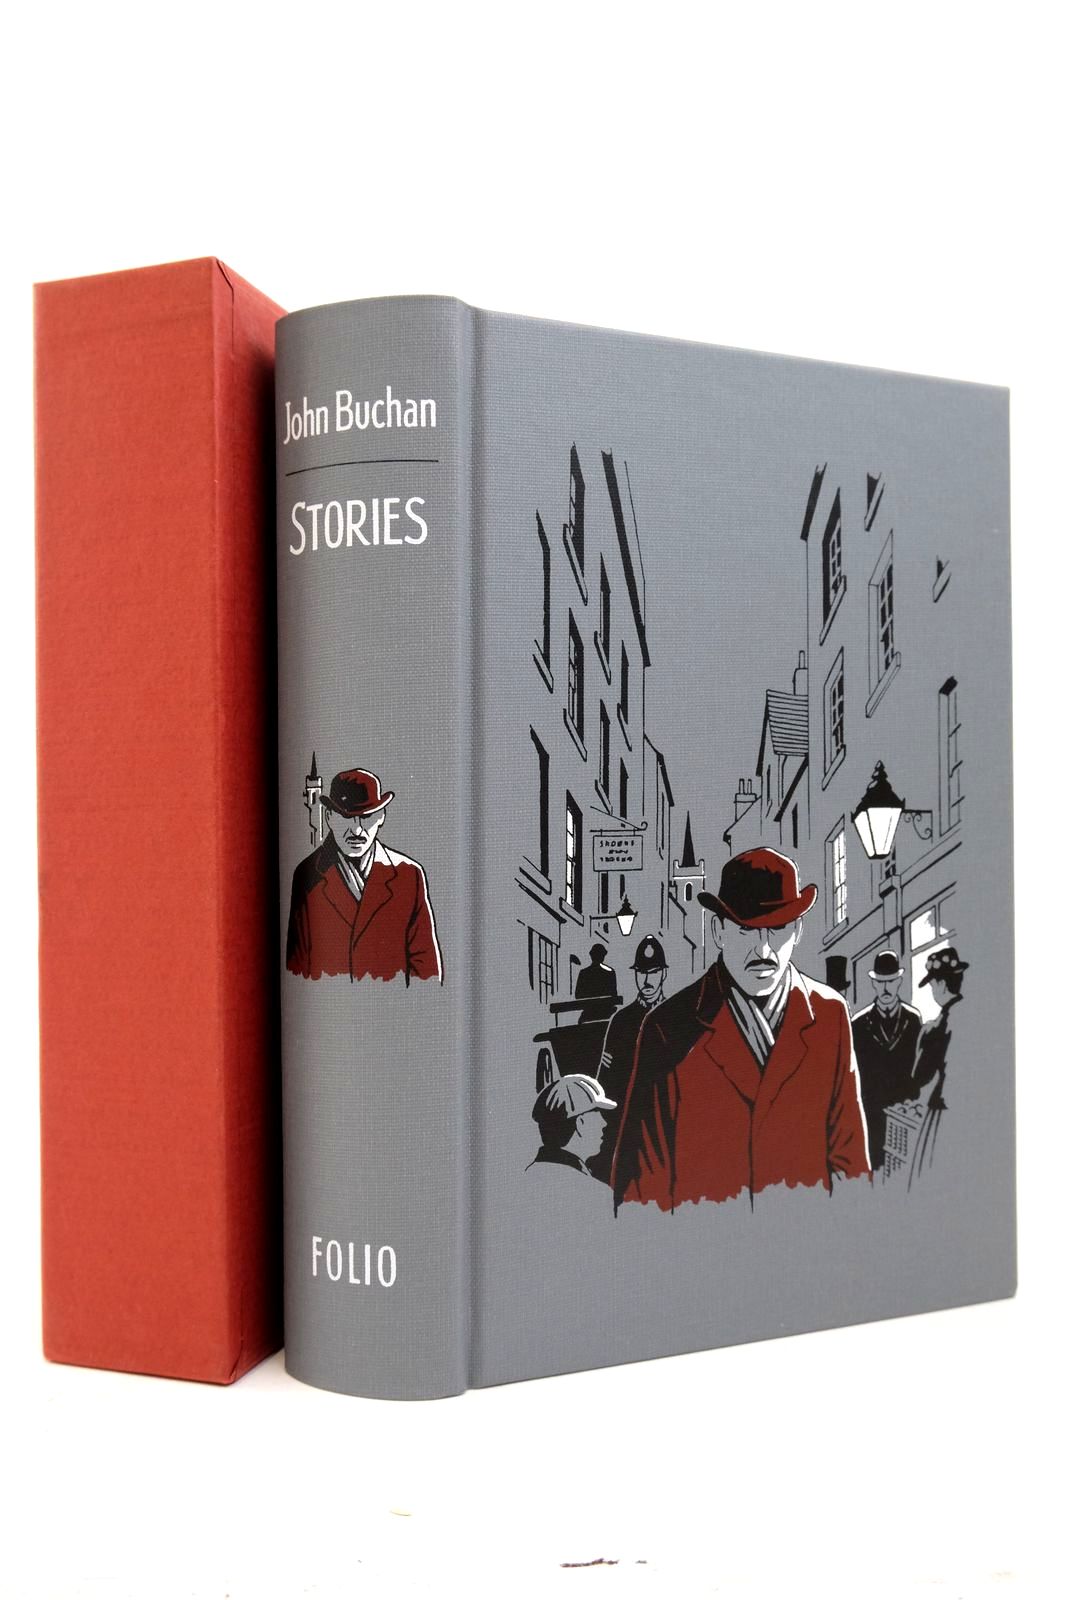 Photo of JOHN BUCHAN STORIES written by Buchan, John illustrated by Hardcastle, Nick published by Folio Society (STOCK CODE: 2139485)  for sale by Stella & Rose's Books